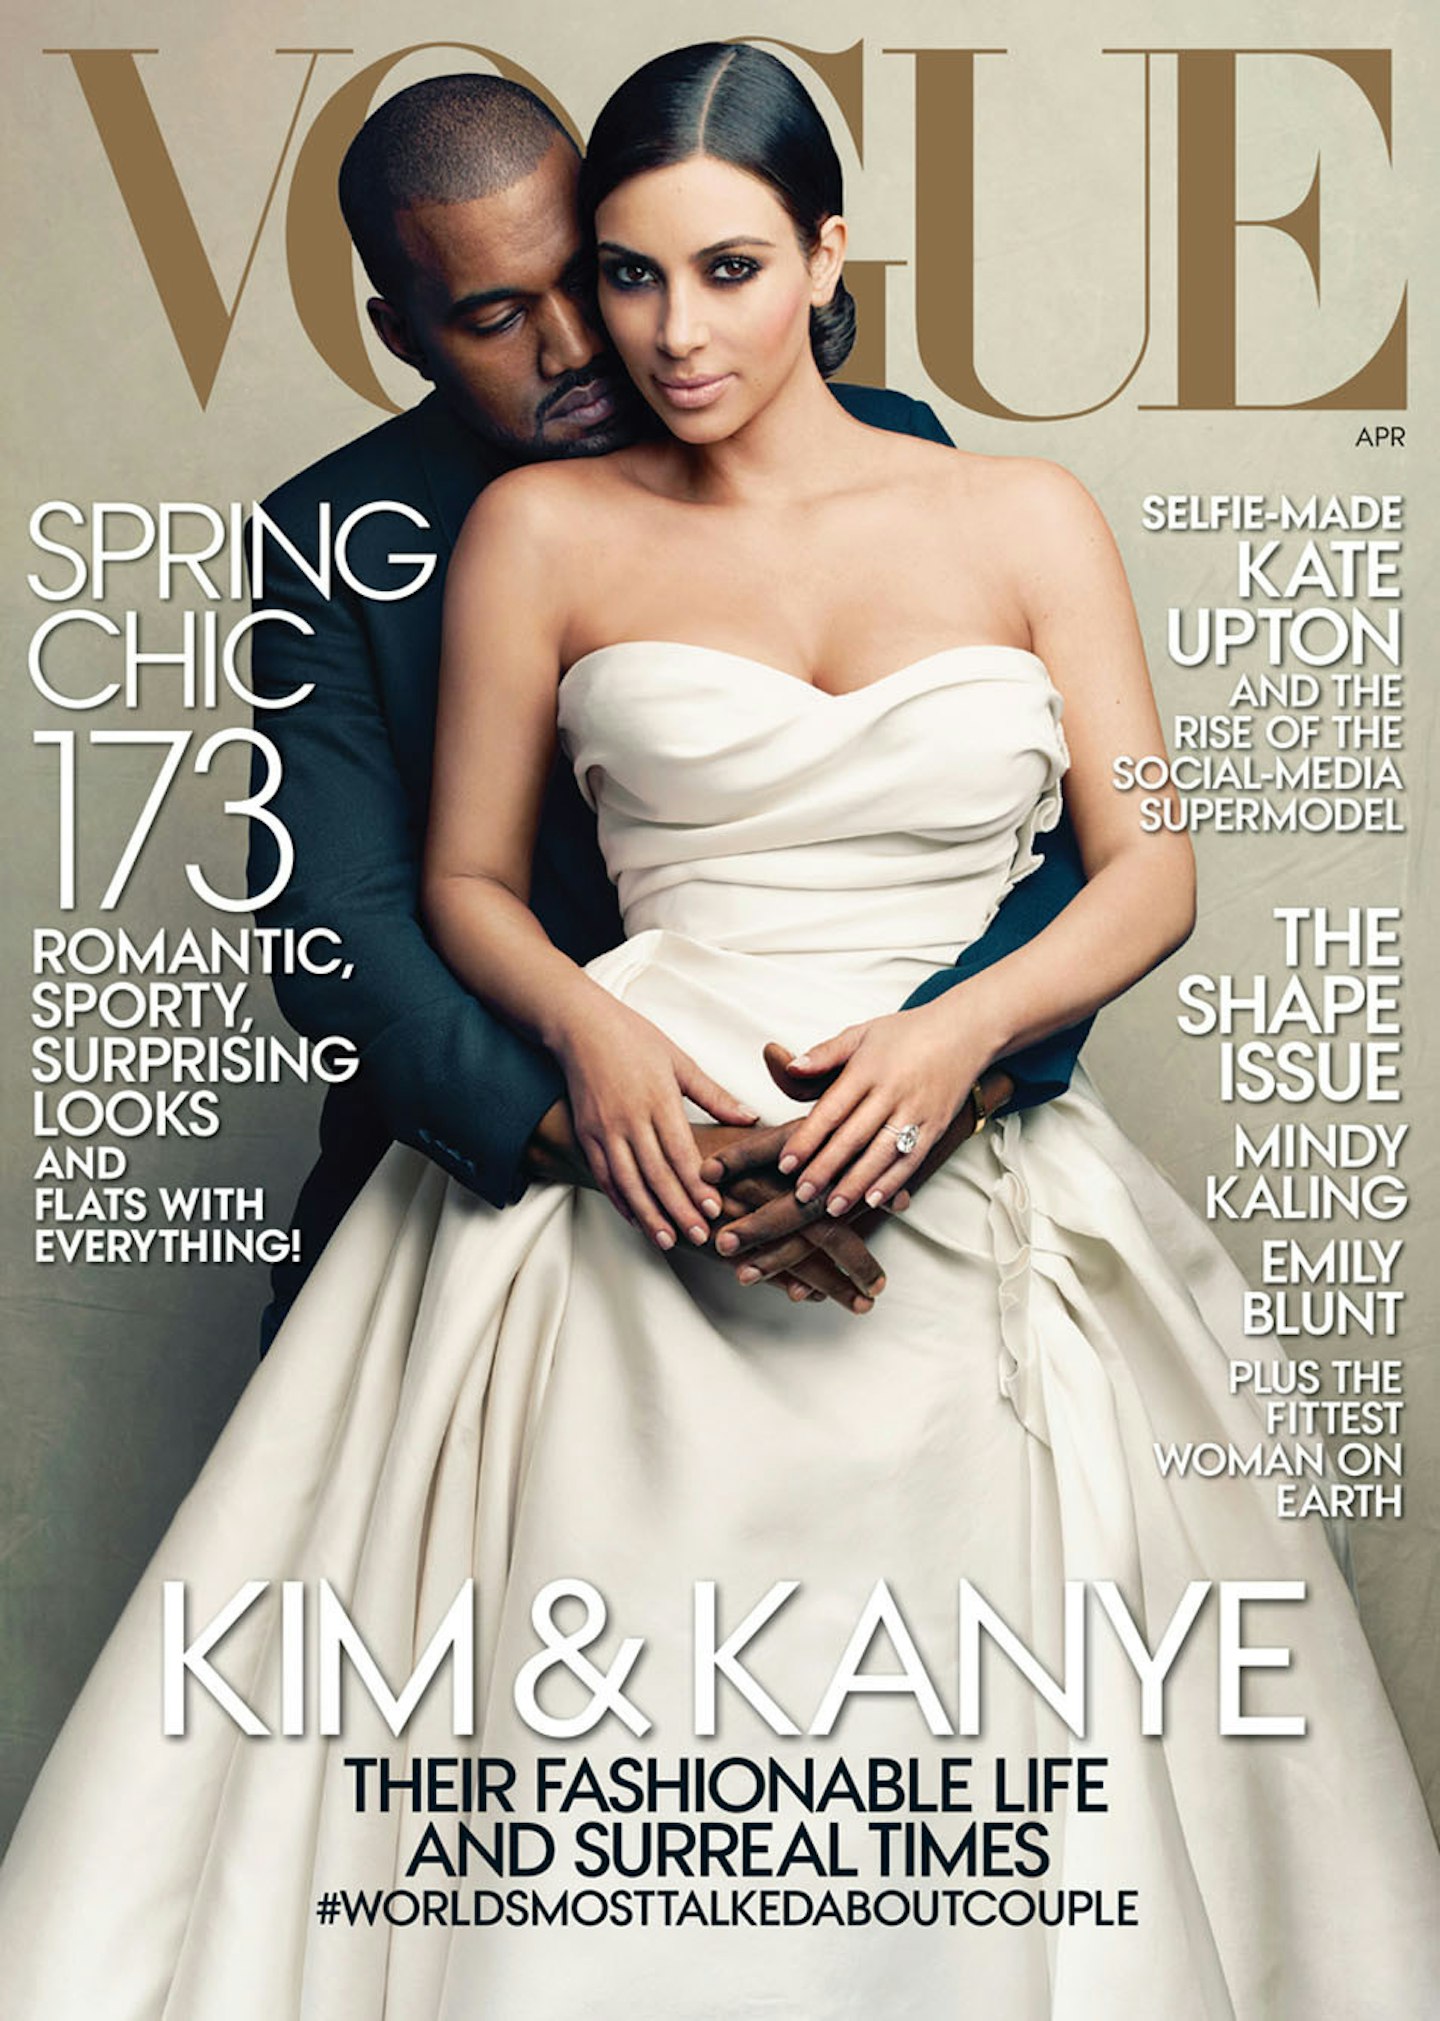 Kimye on the cover of Vogue US April last year.